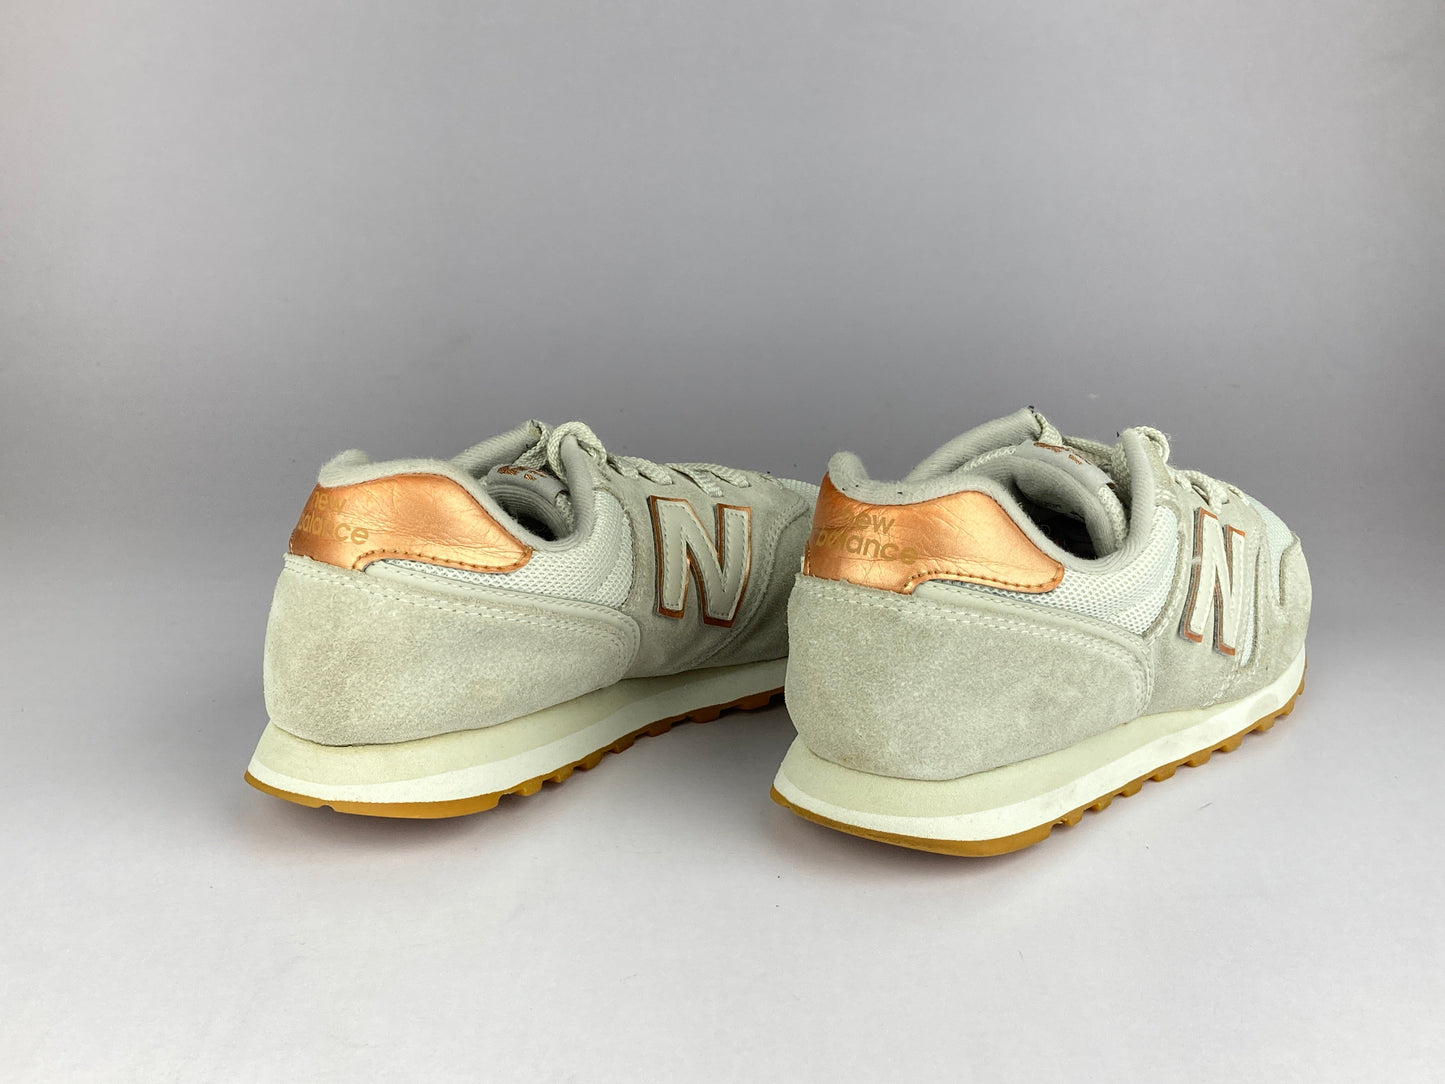 New Balance Wmns 373 Series 'Gray' B Wide WL373CD2-Sneakers-Athletic Corner